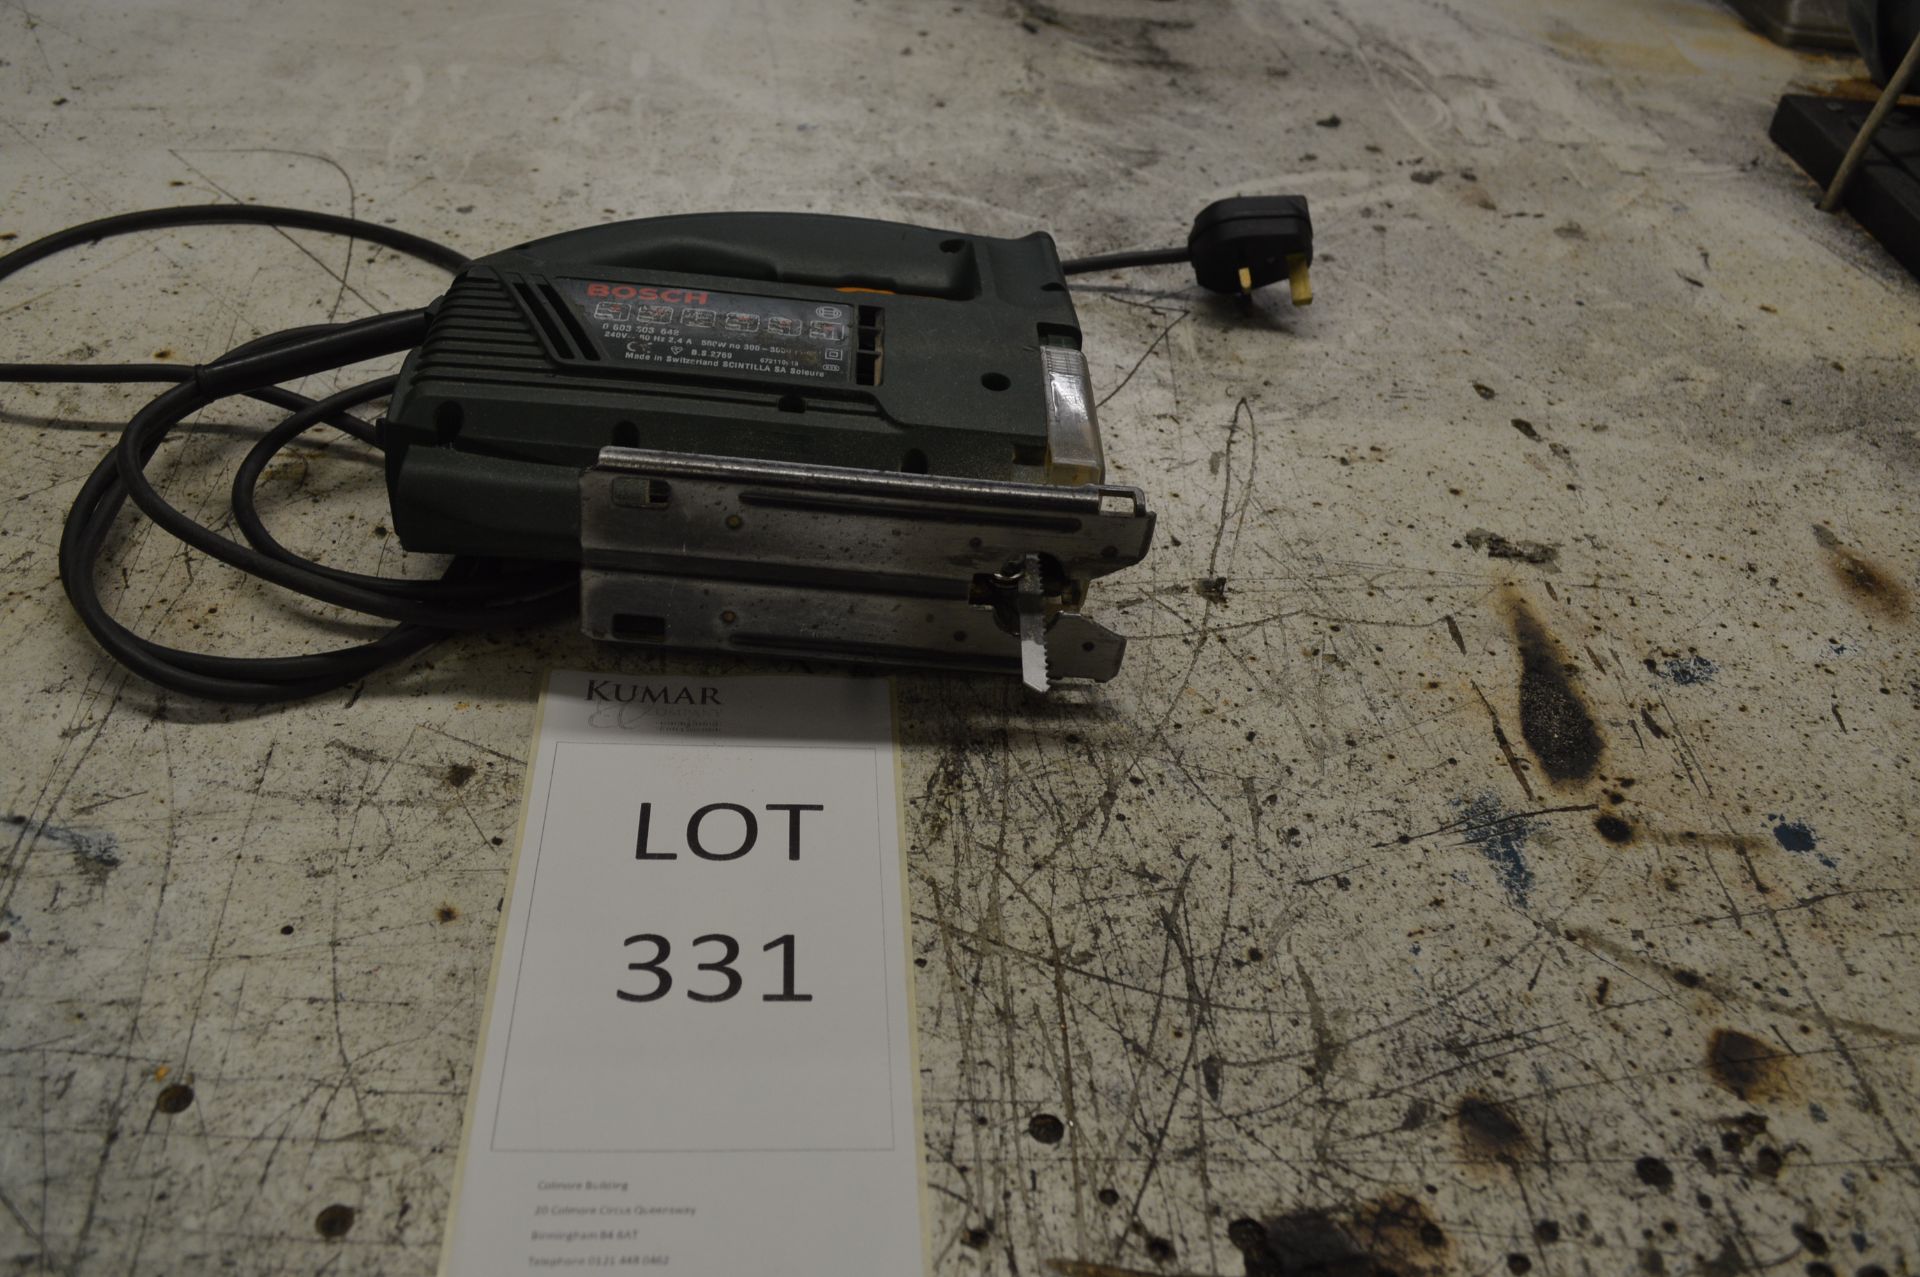 Bosch 603-303-642 Jig Saw PST 700 - Image 3 of 5